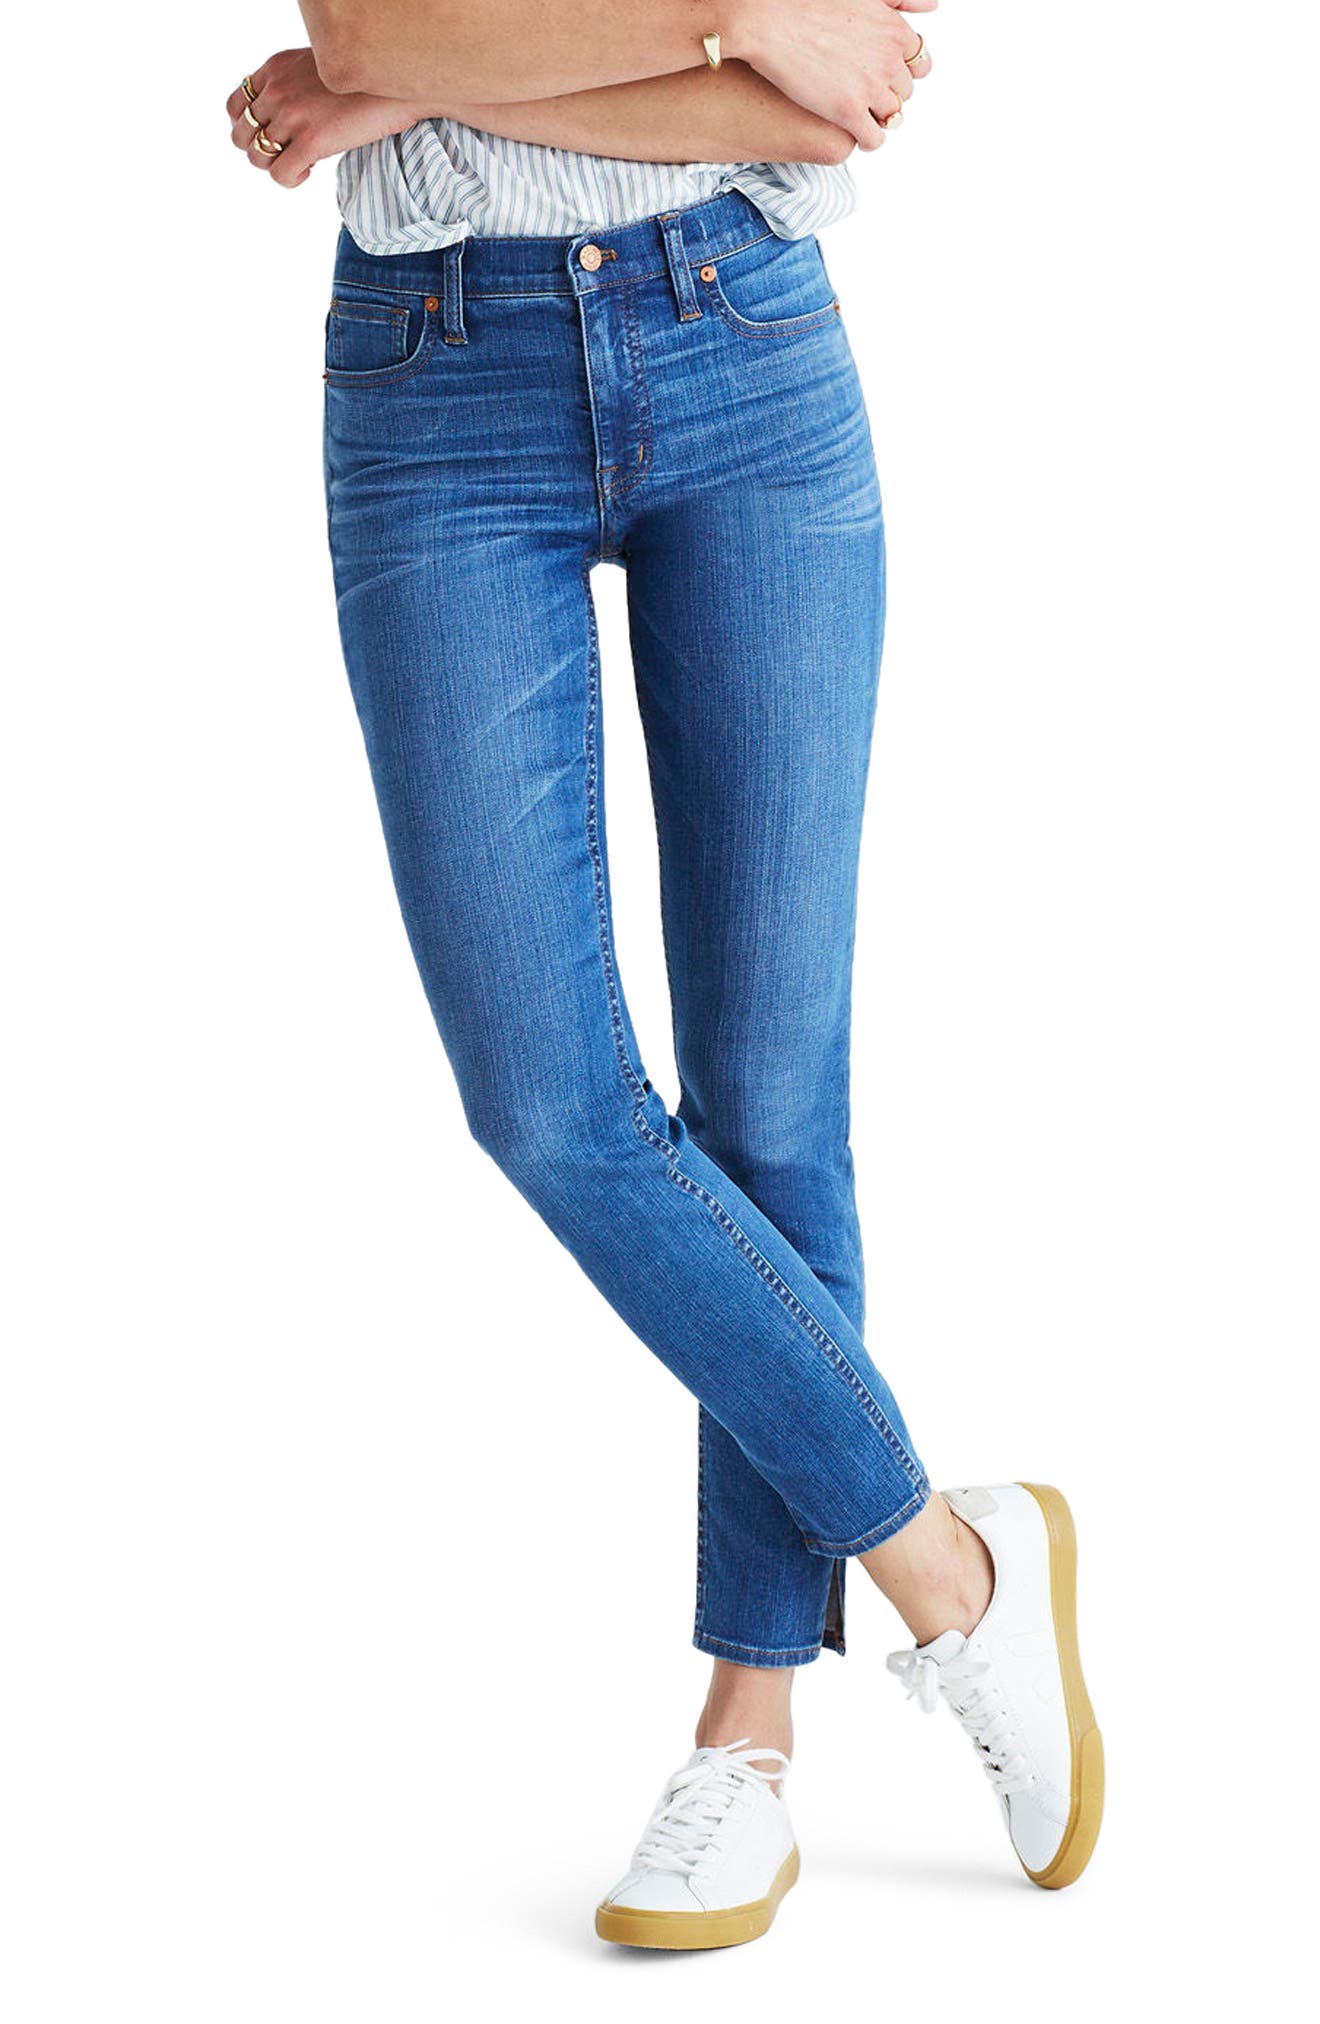 madewell 9 inch high rise skinny jeans